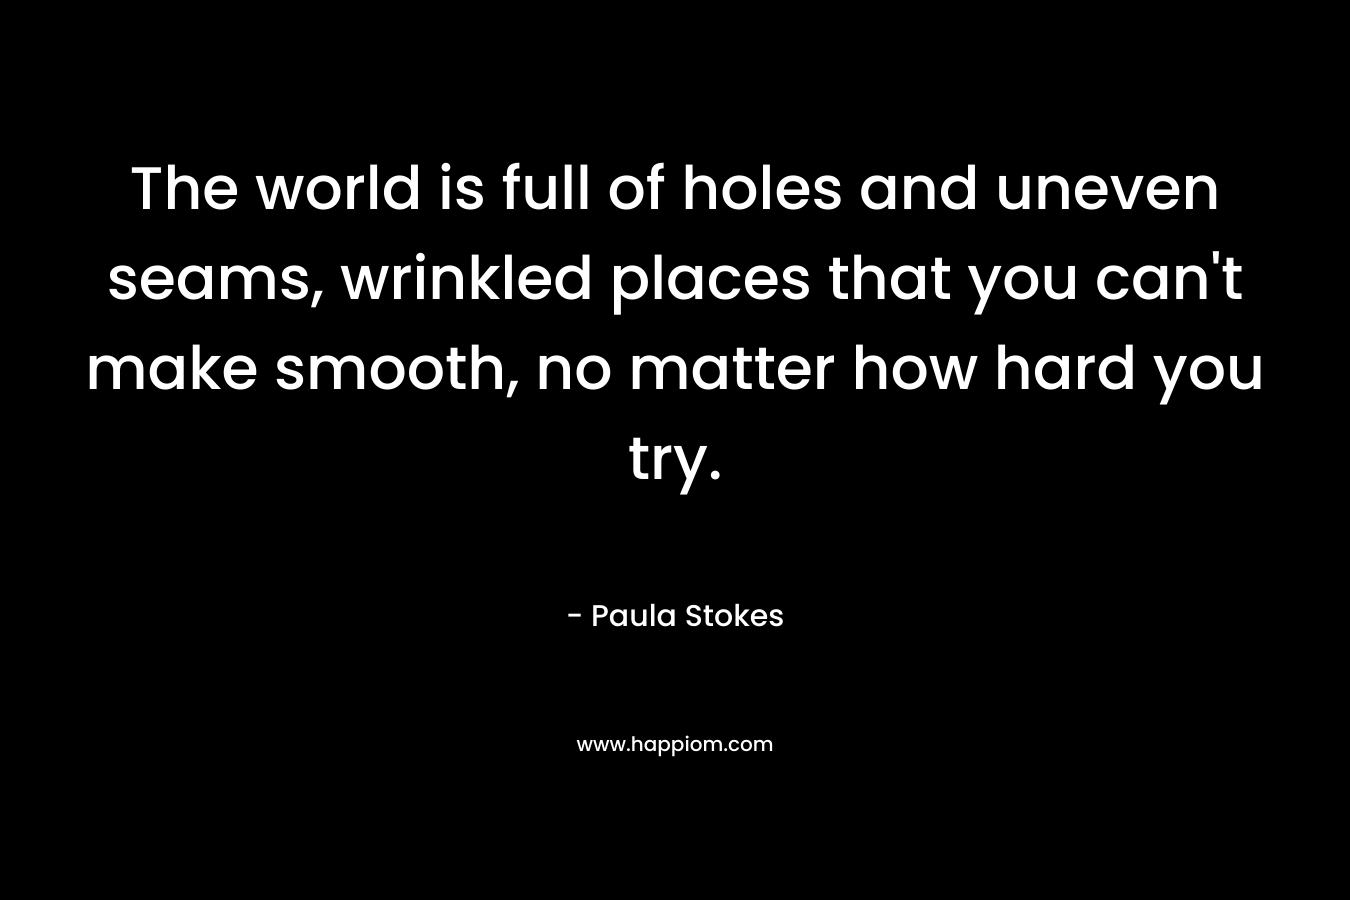 The world is full of holes and uneven seams, wrinkled places that you can't make smooth, no matter how hard you try.